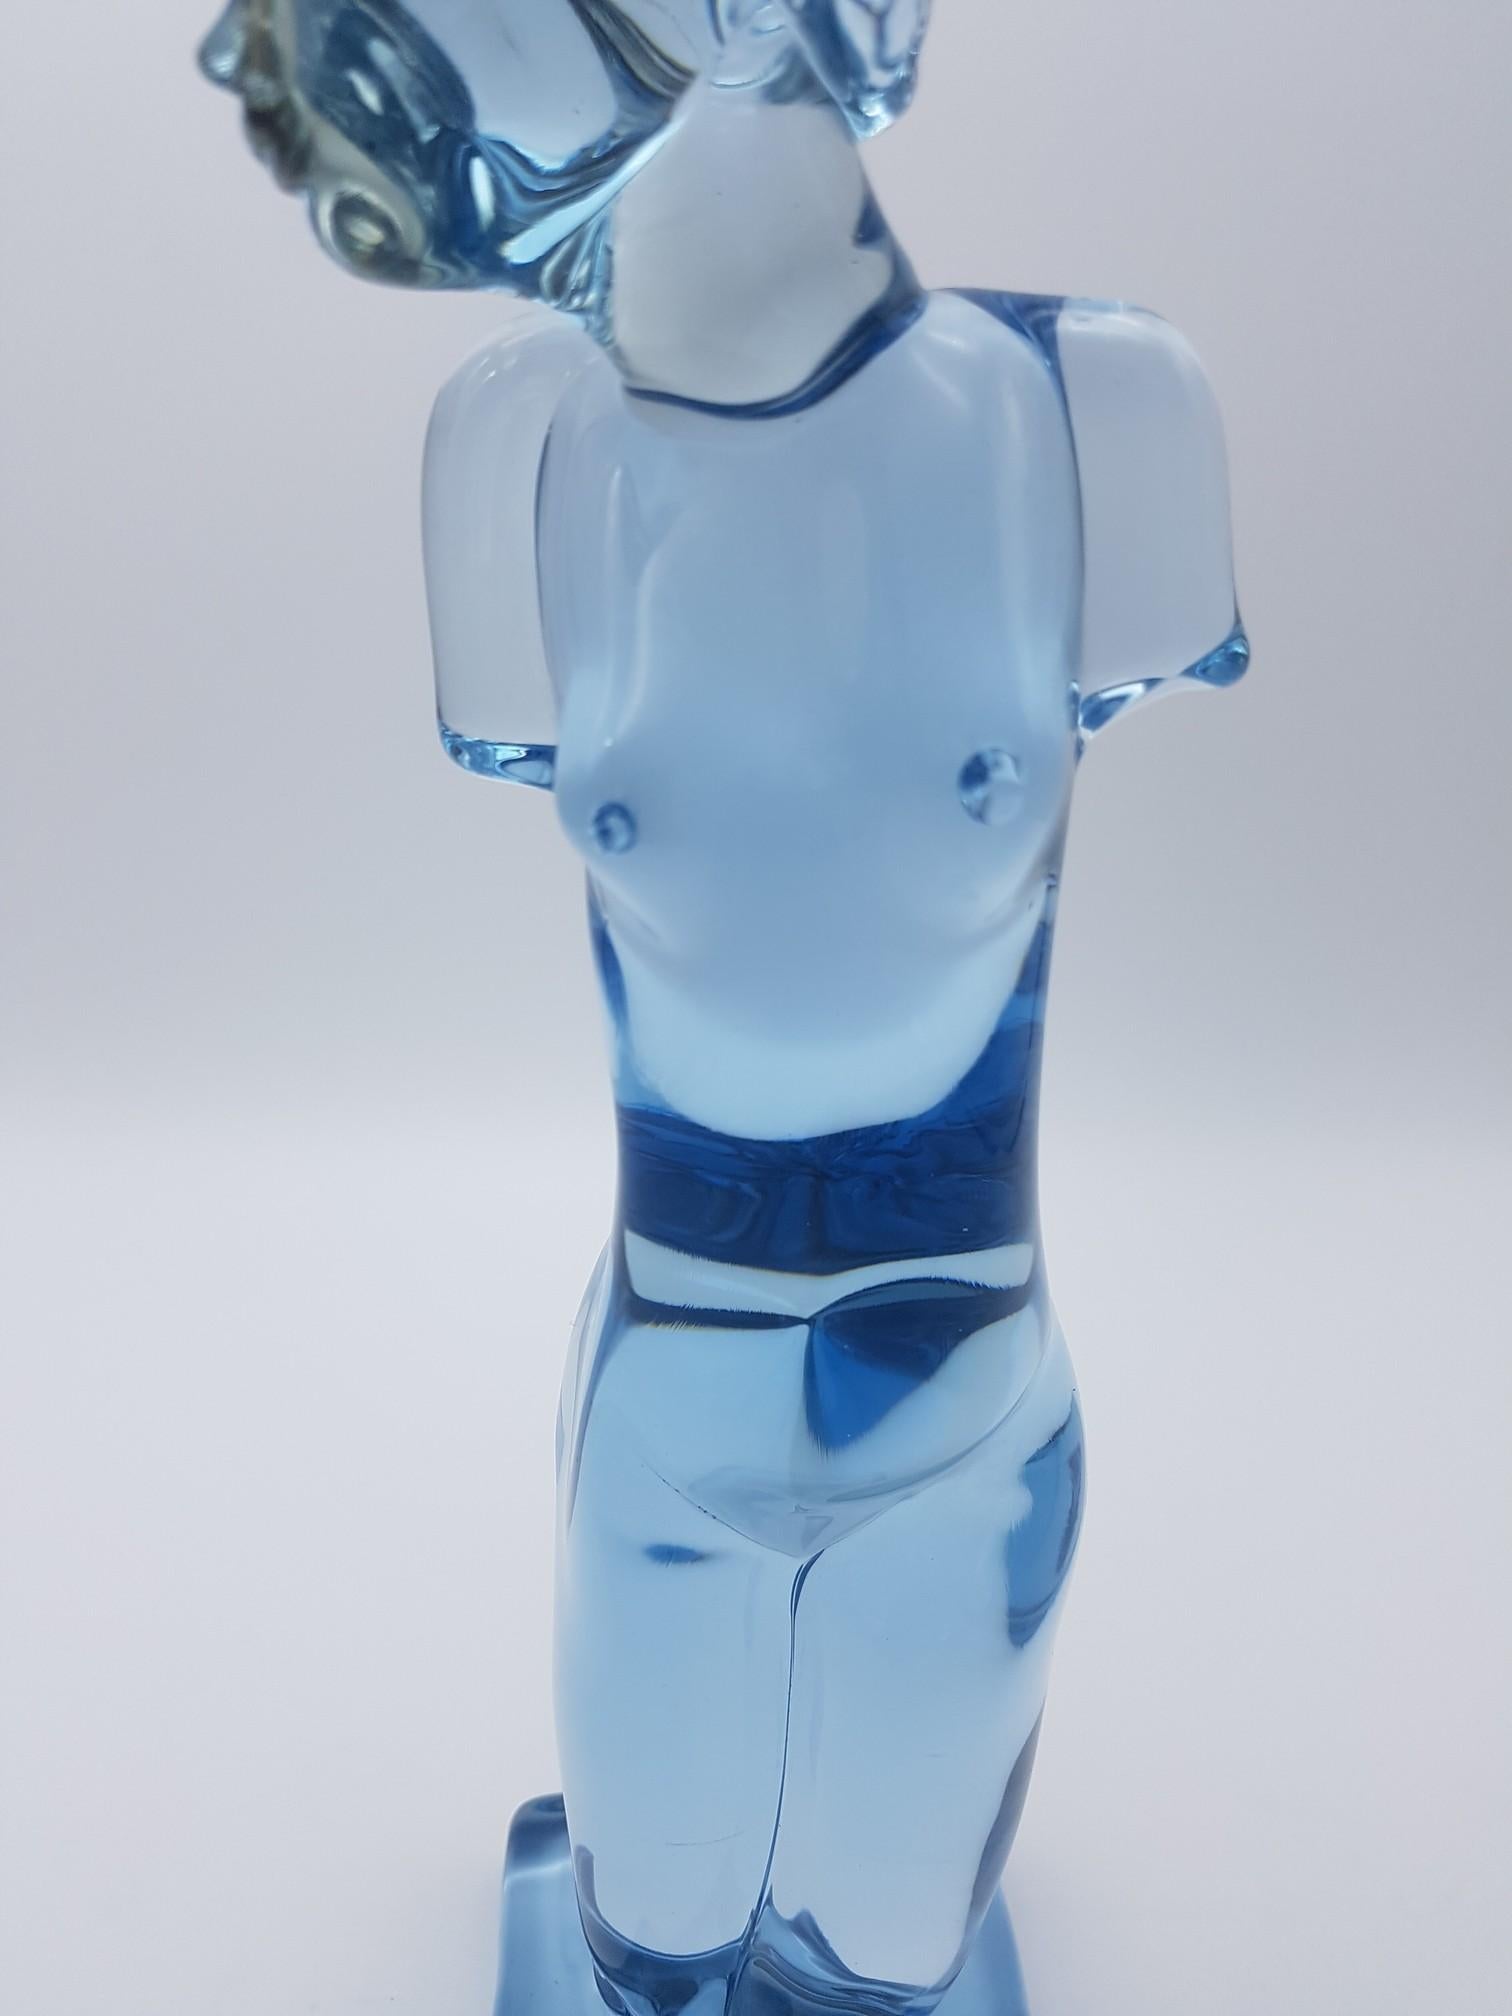 Hand-Crafted Modern Murano Glass Female Torso/Sculpture, Sky Blue Color by Cenedese For Sale